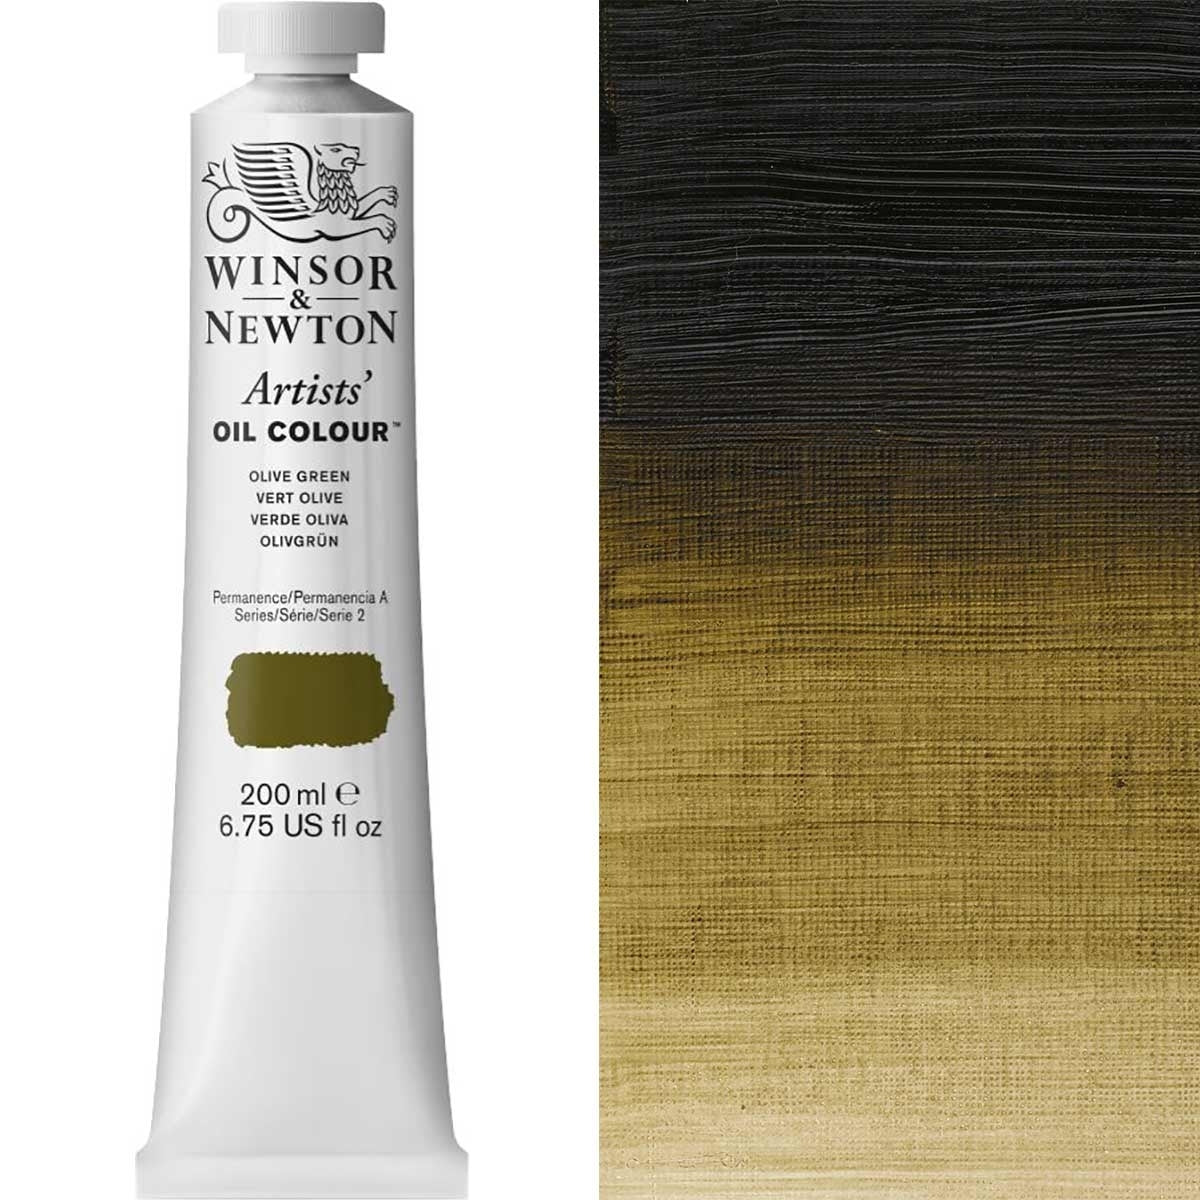 Winsor and Newton - Artists' Oil Colour - 200ml - Olive Green